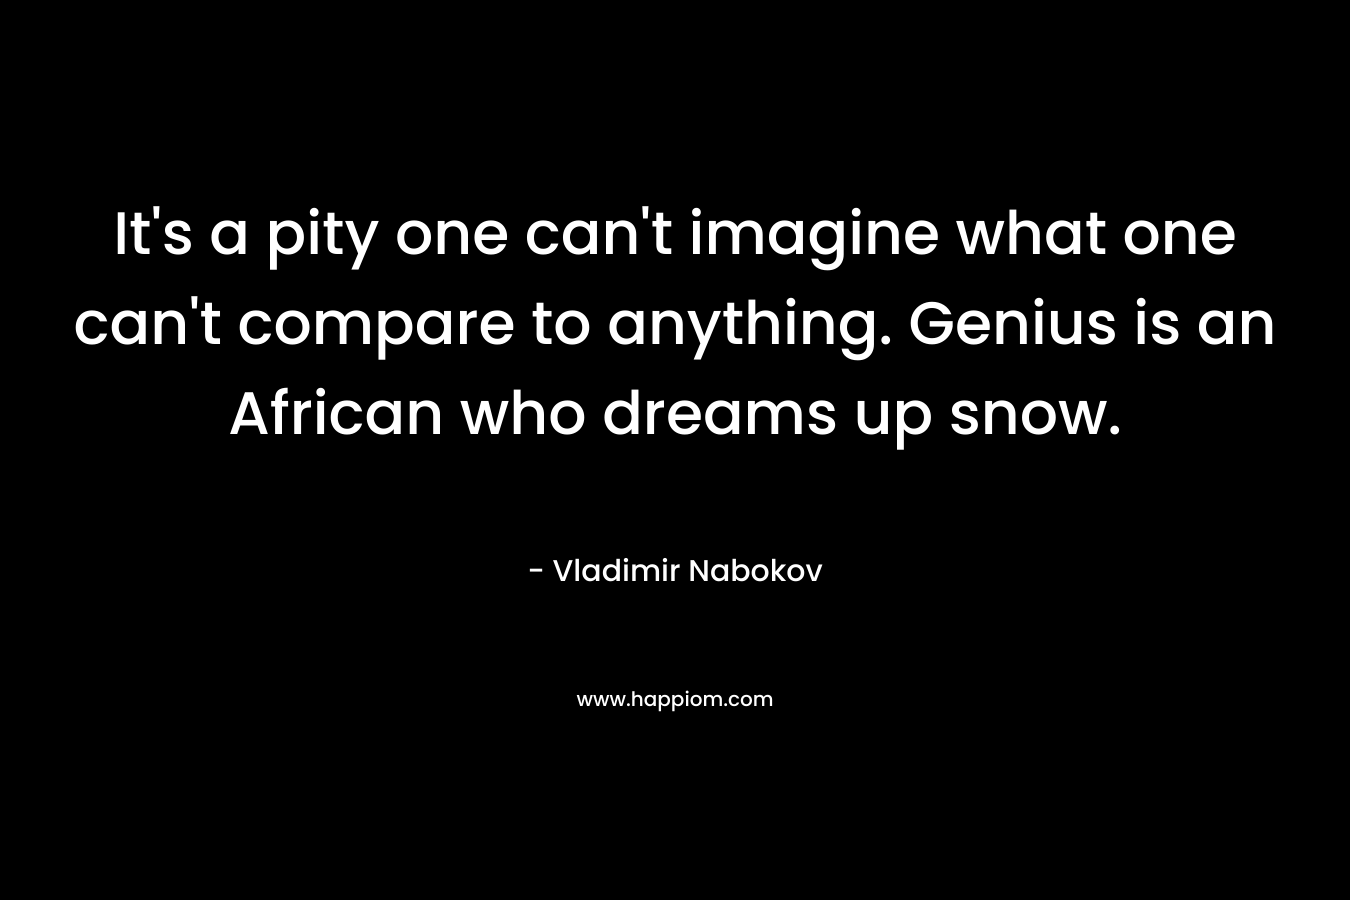 It's a pity one can't imagine what one can't compare to anything. Genius is an African who dreams up snow. 